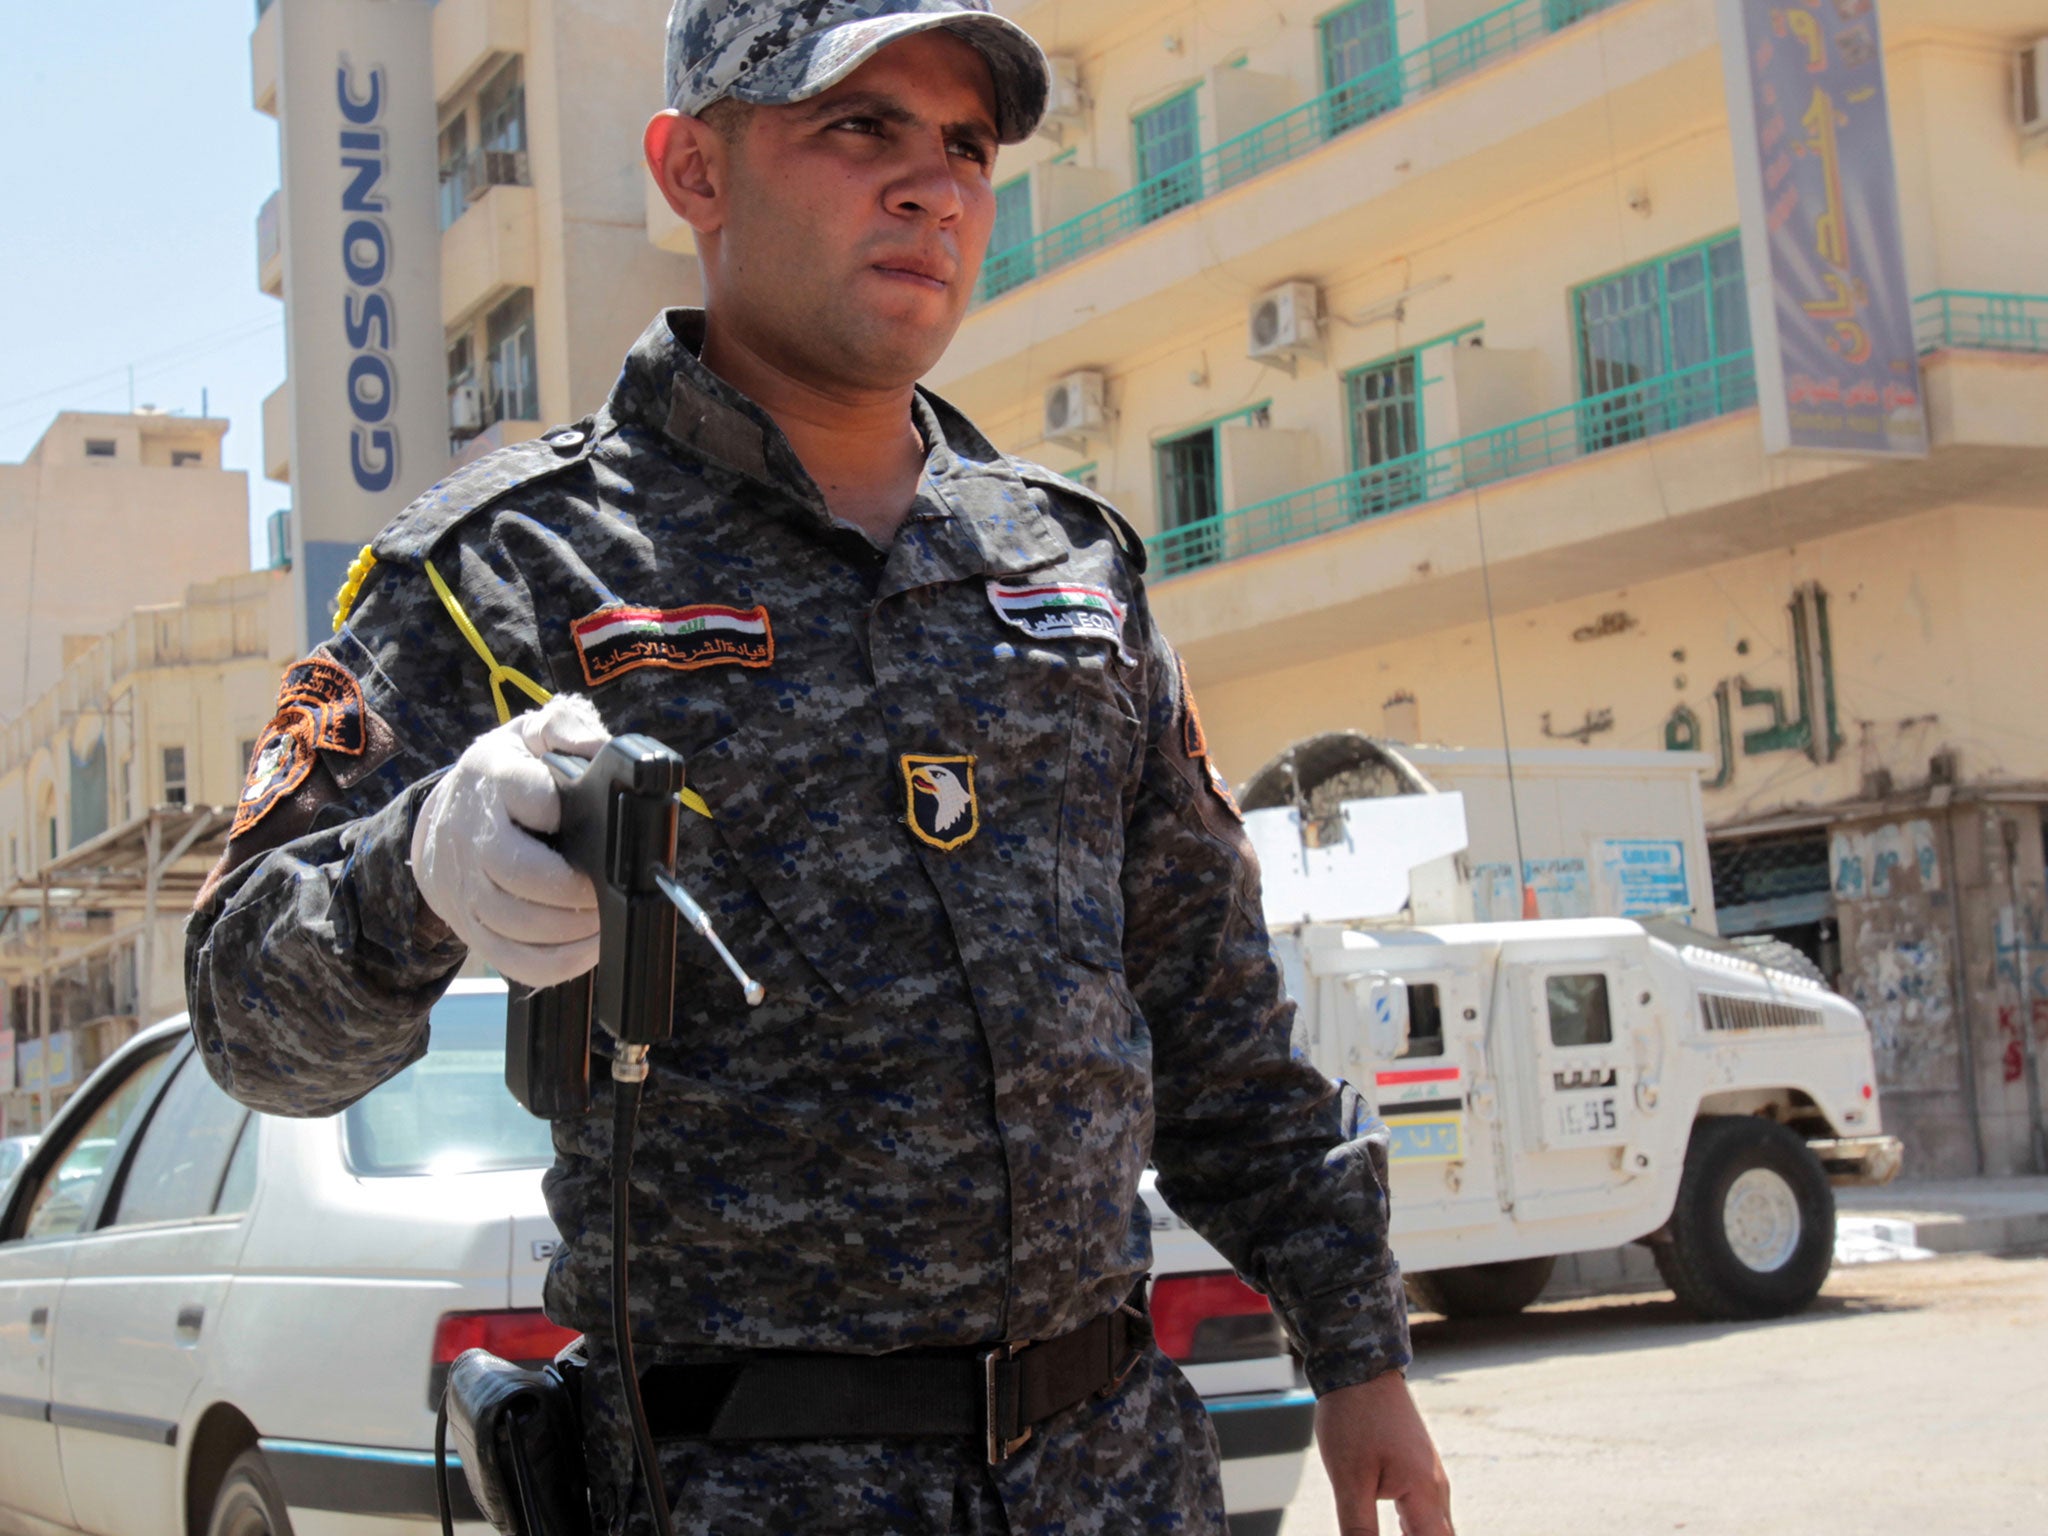 Similar fake bomb detectors have also been used by police in Iraq, shown here doing checks in Baghdad in 2012